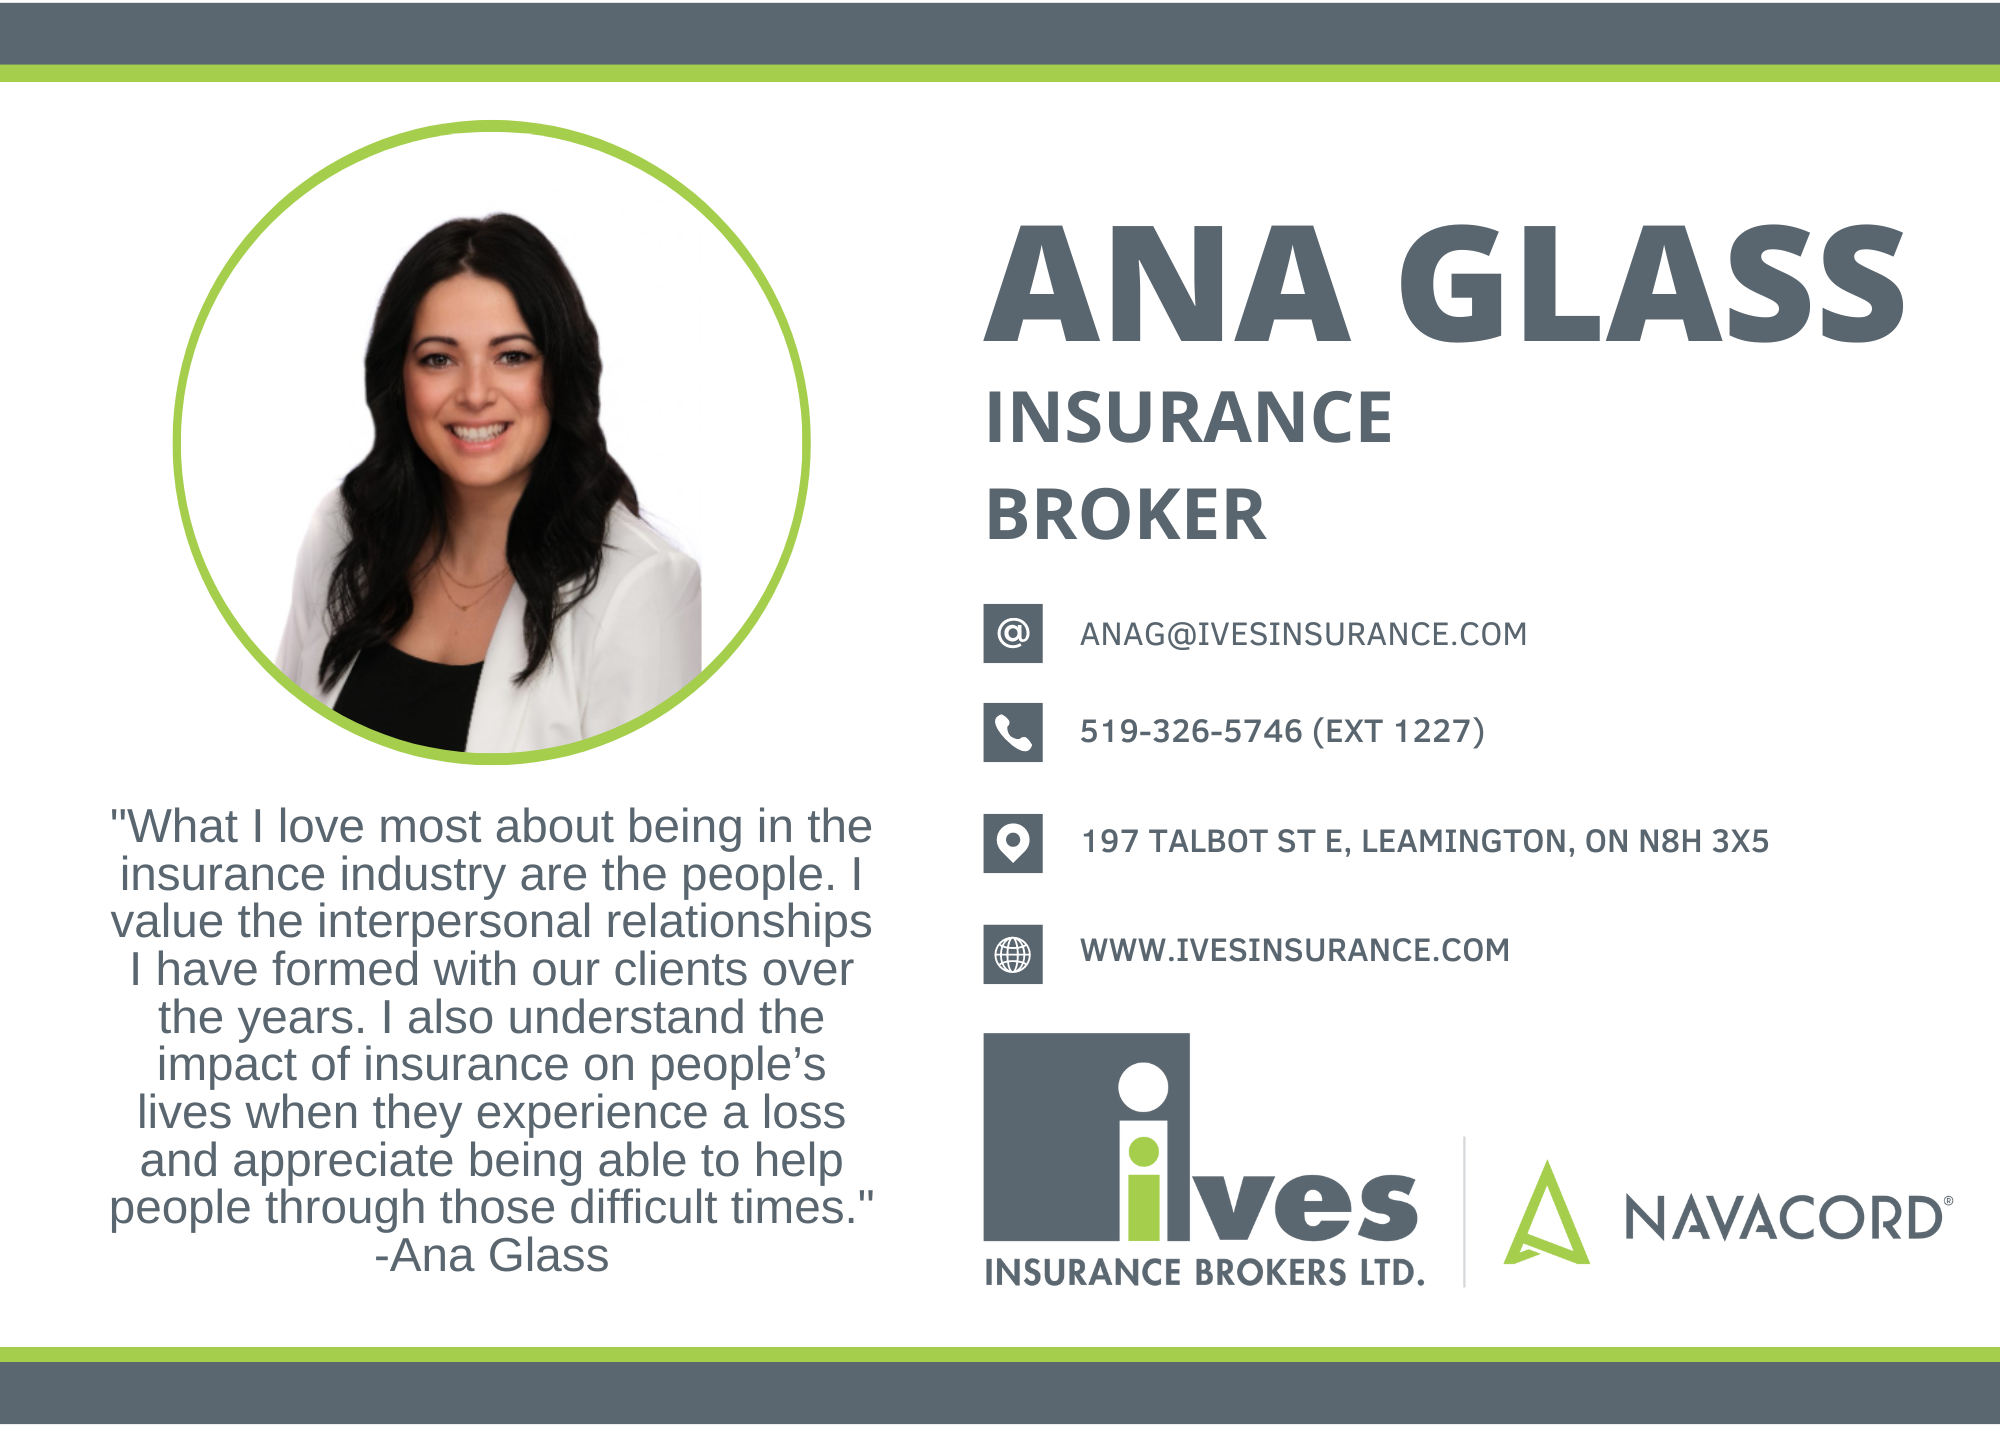 Ana Glass Ives Insurance Brokers 